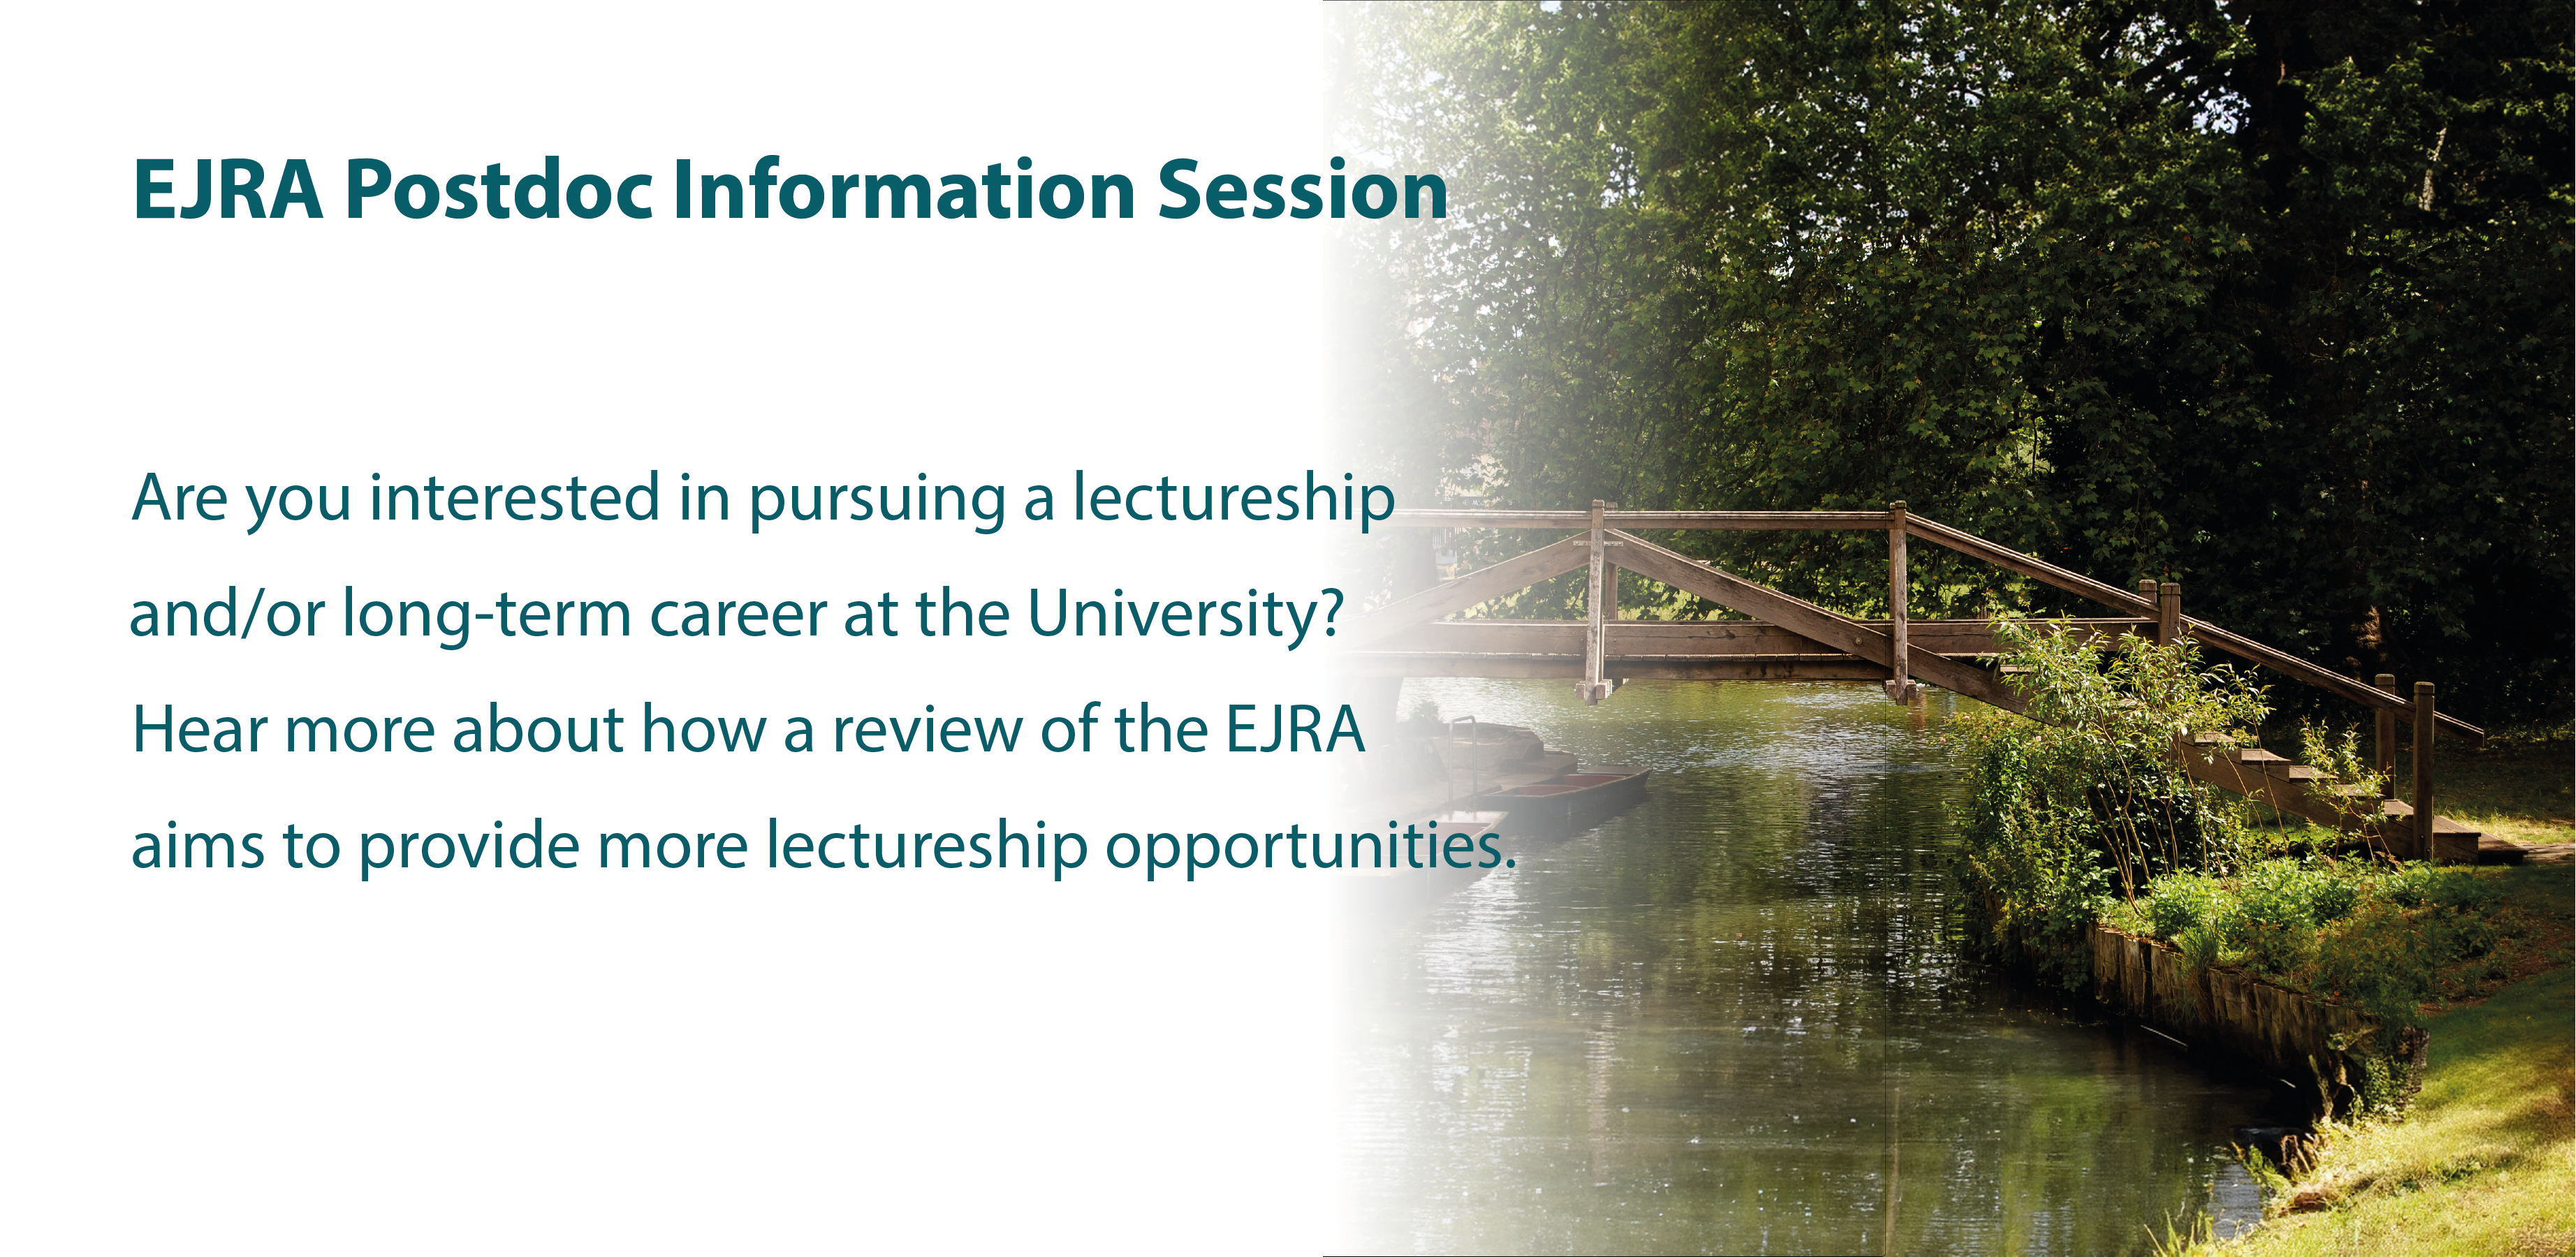 EJRA Postdoc Information Session. Are you interested in pursuing a lectureship and/or long-term career at the University of Cambridge? Hear more about how a review of the EJRA aims to provide more lectureship opportunities.